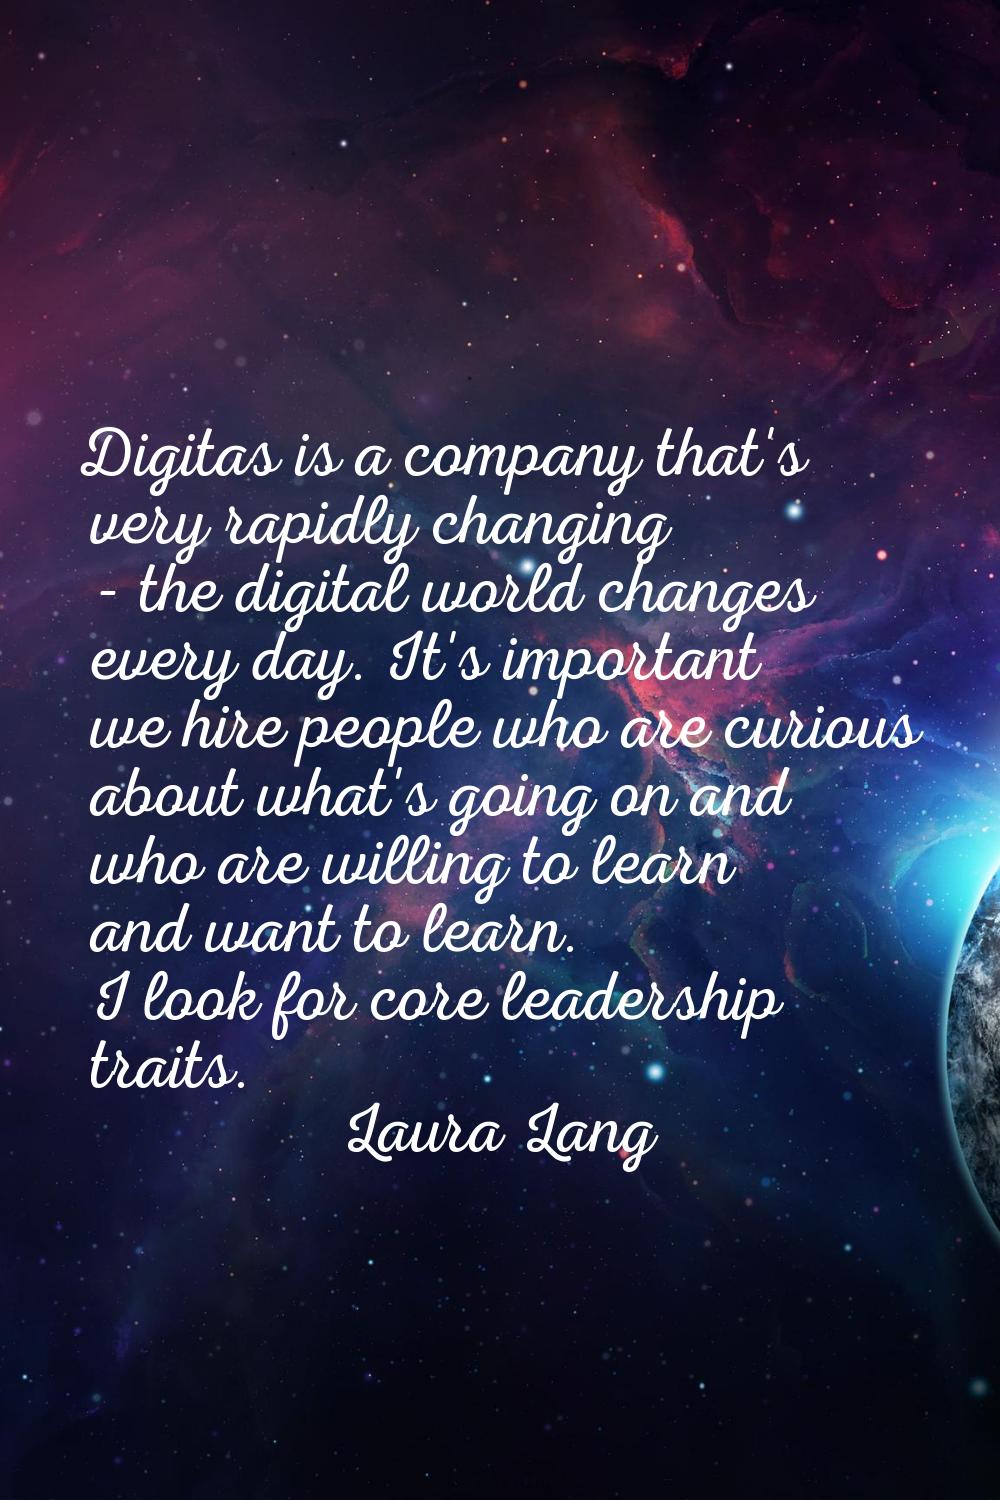 Digitas is a company that's very rapidly changing - the digital world changes every day. It's impor